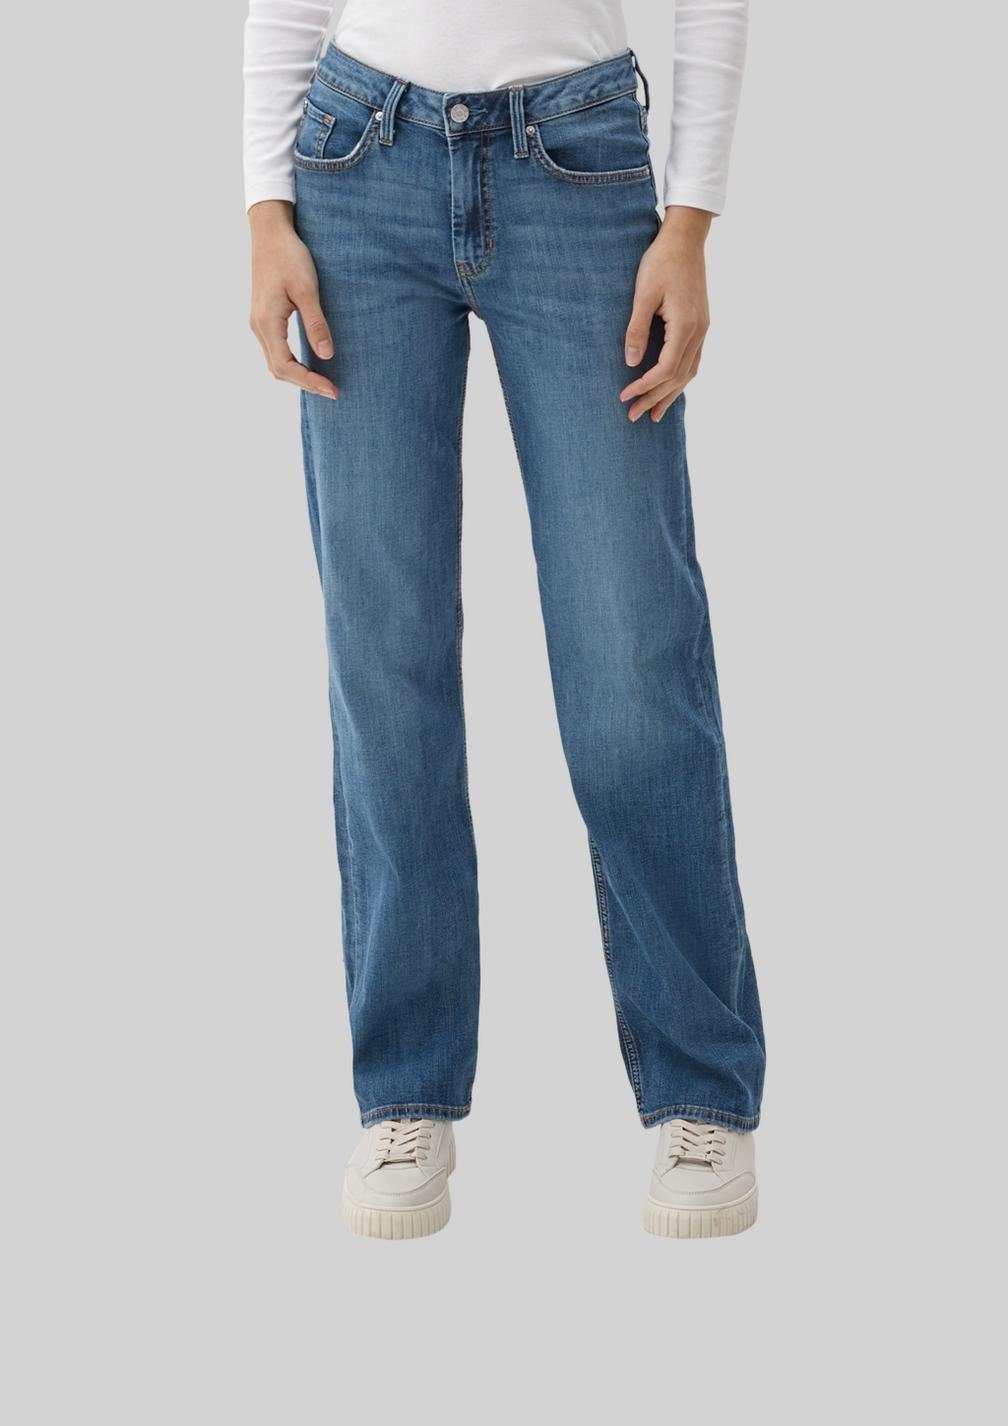 s.Oliver Comfort-fit-Jeans KAROLIN mit leichter Waschung, Relaxed Fit / Mid rise / Straight Leg Blau